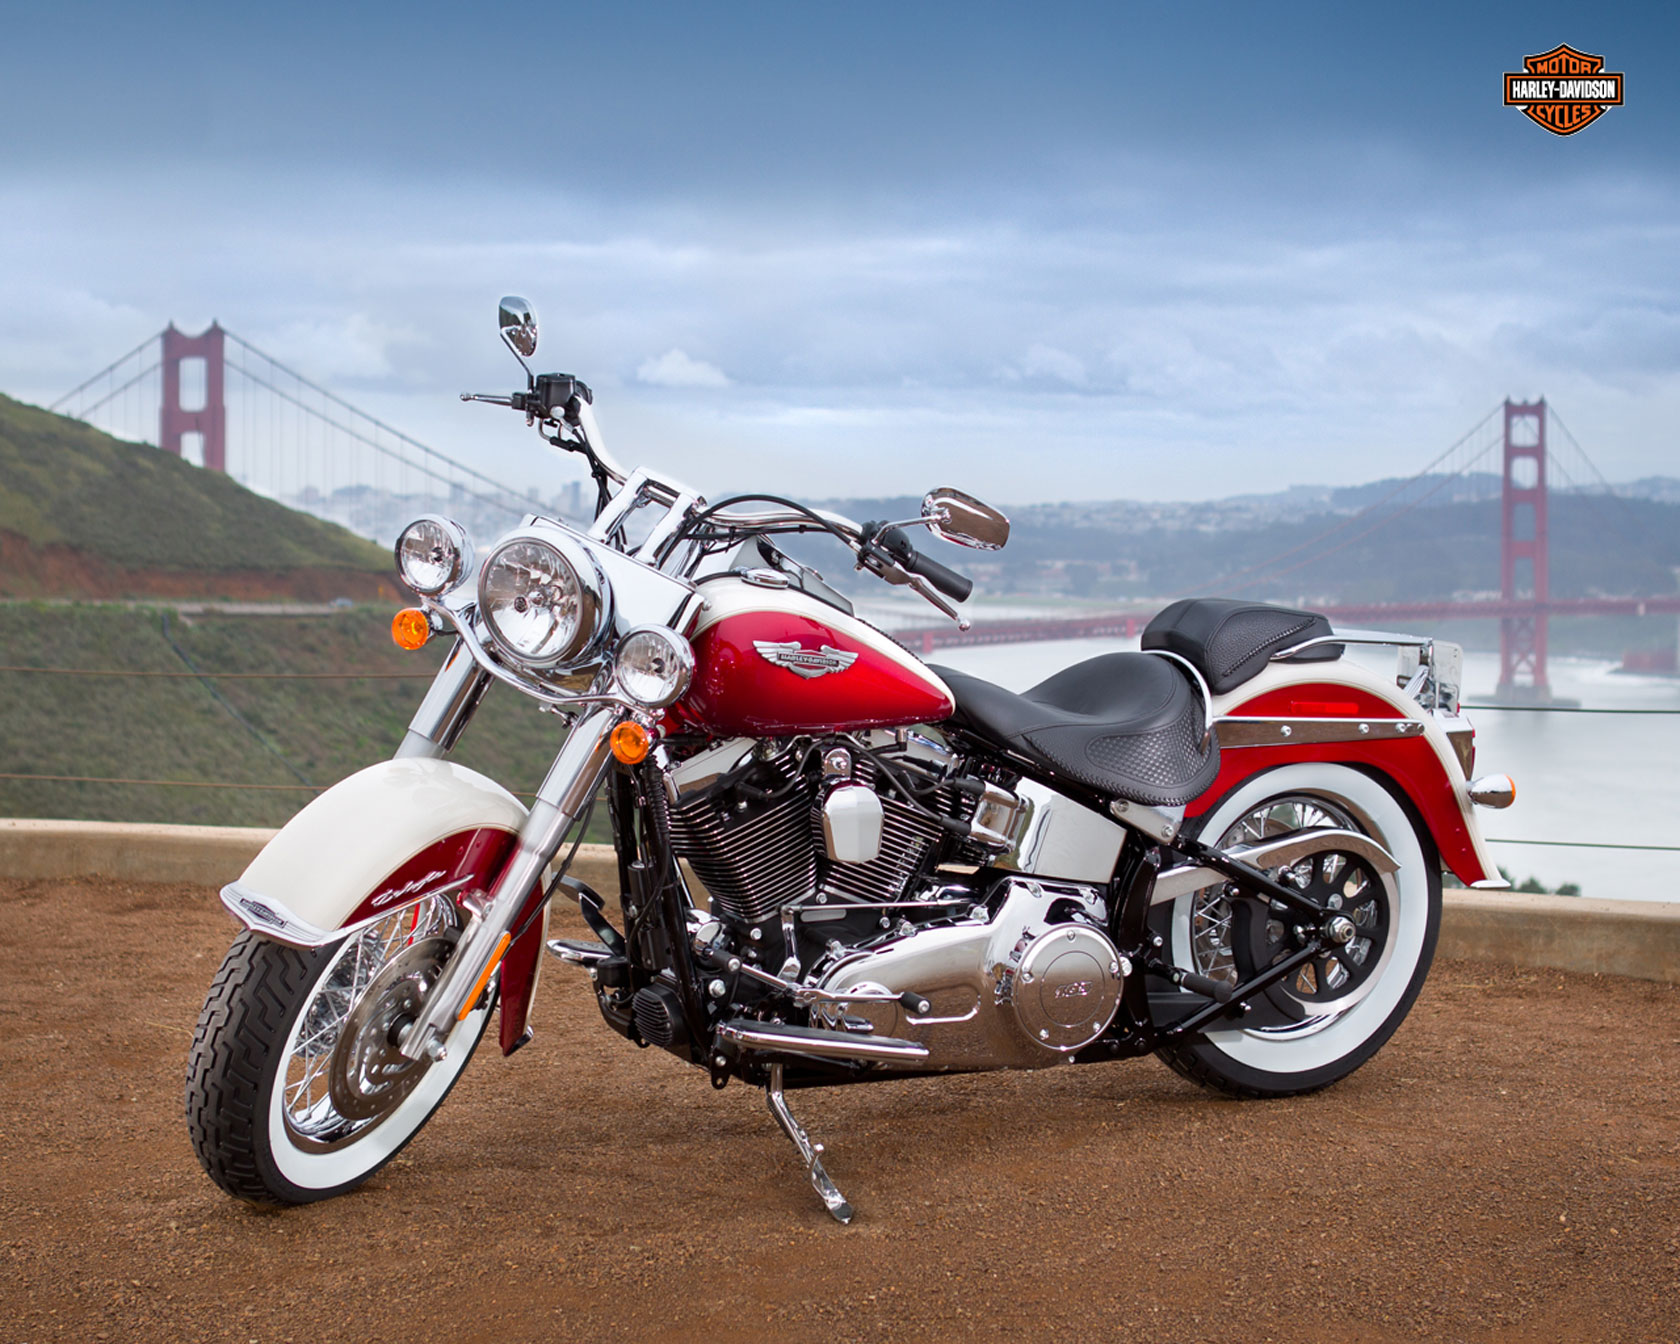 Harley-davidson Softail Deluxe Backgrounds on Wallpapers Vista